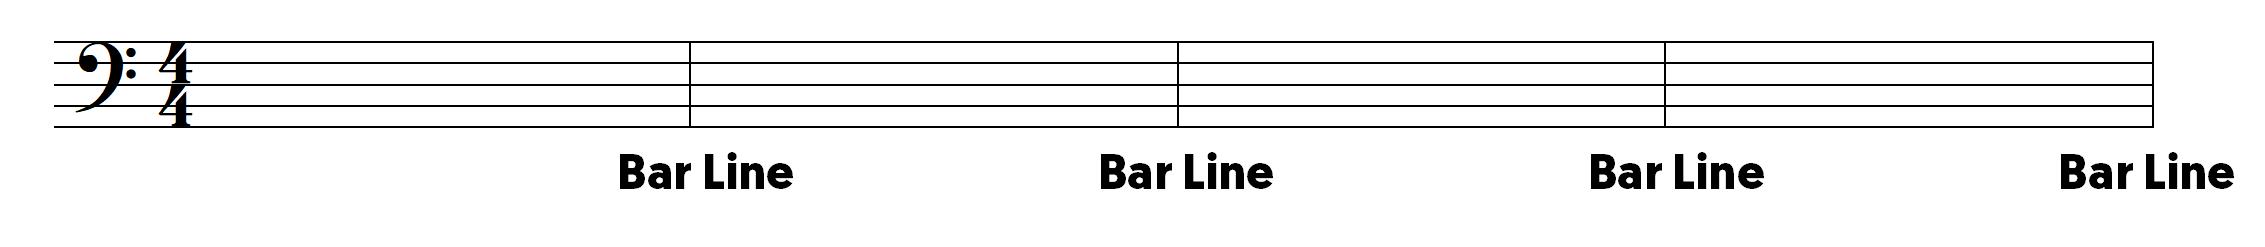 bar lines in music notation